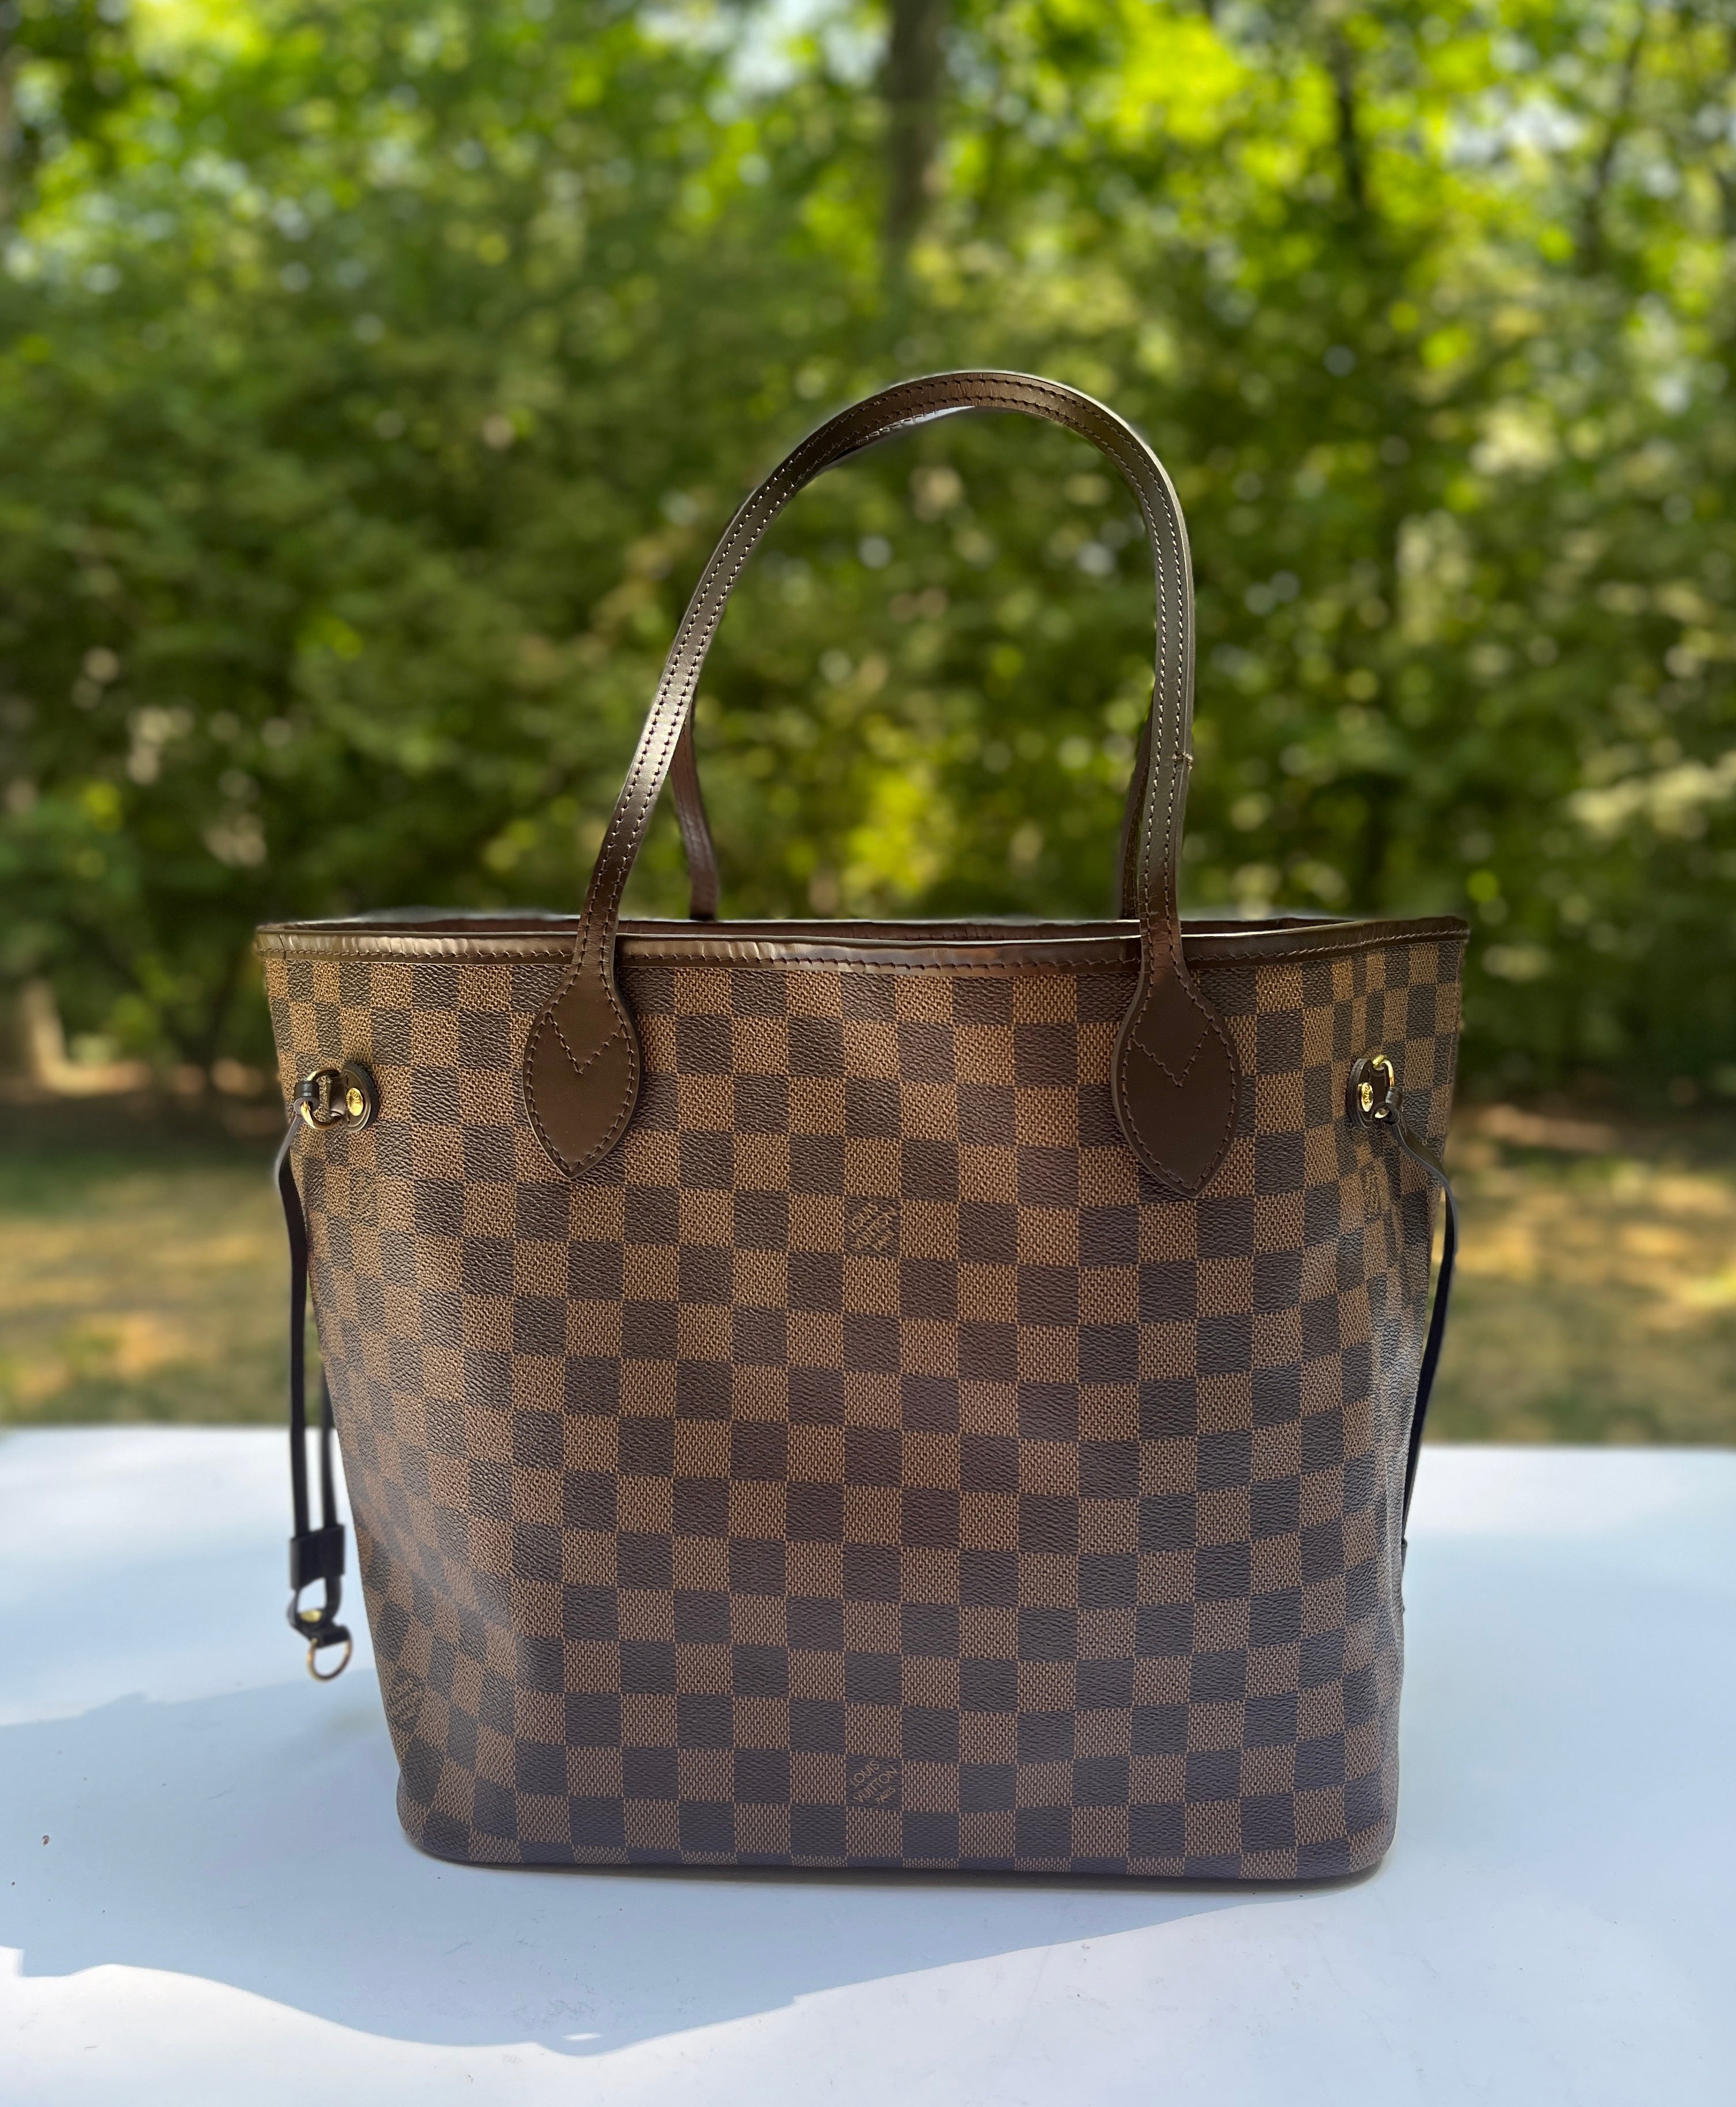 Auth LOUIS VUITTON 3-Way Trevi PM in Damier Ebene Leather w/ crossbody  strap